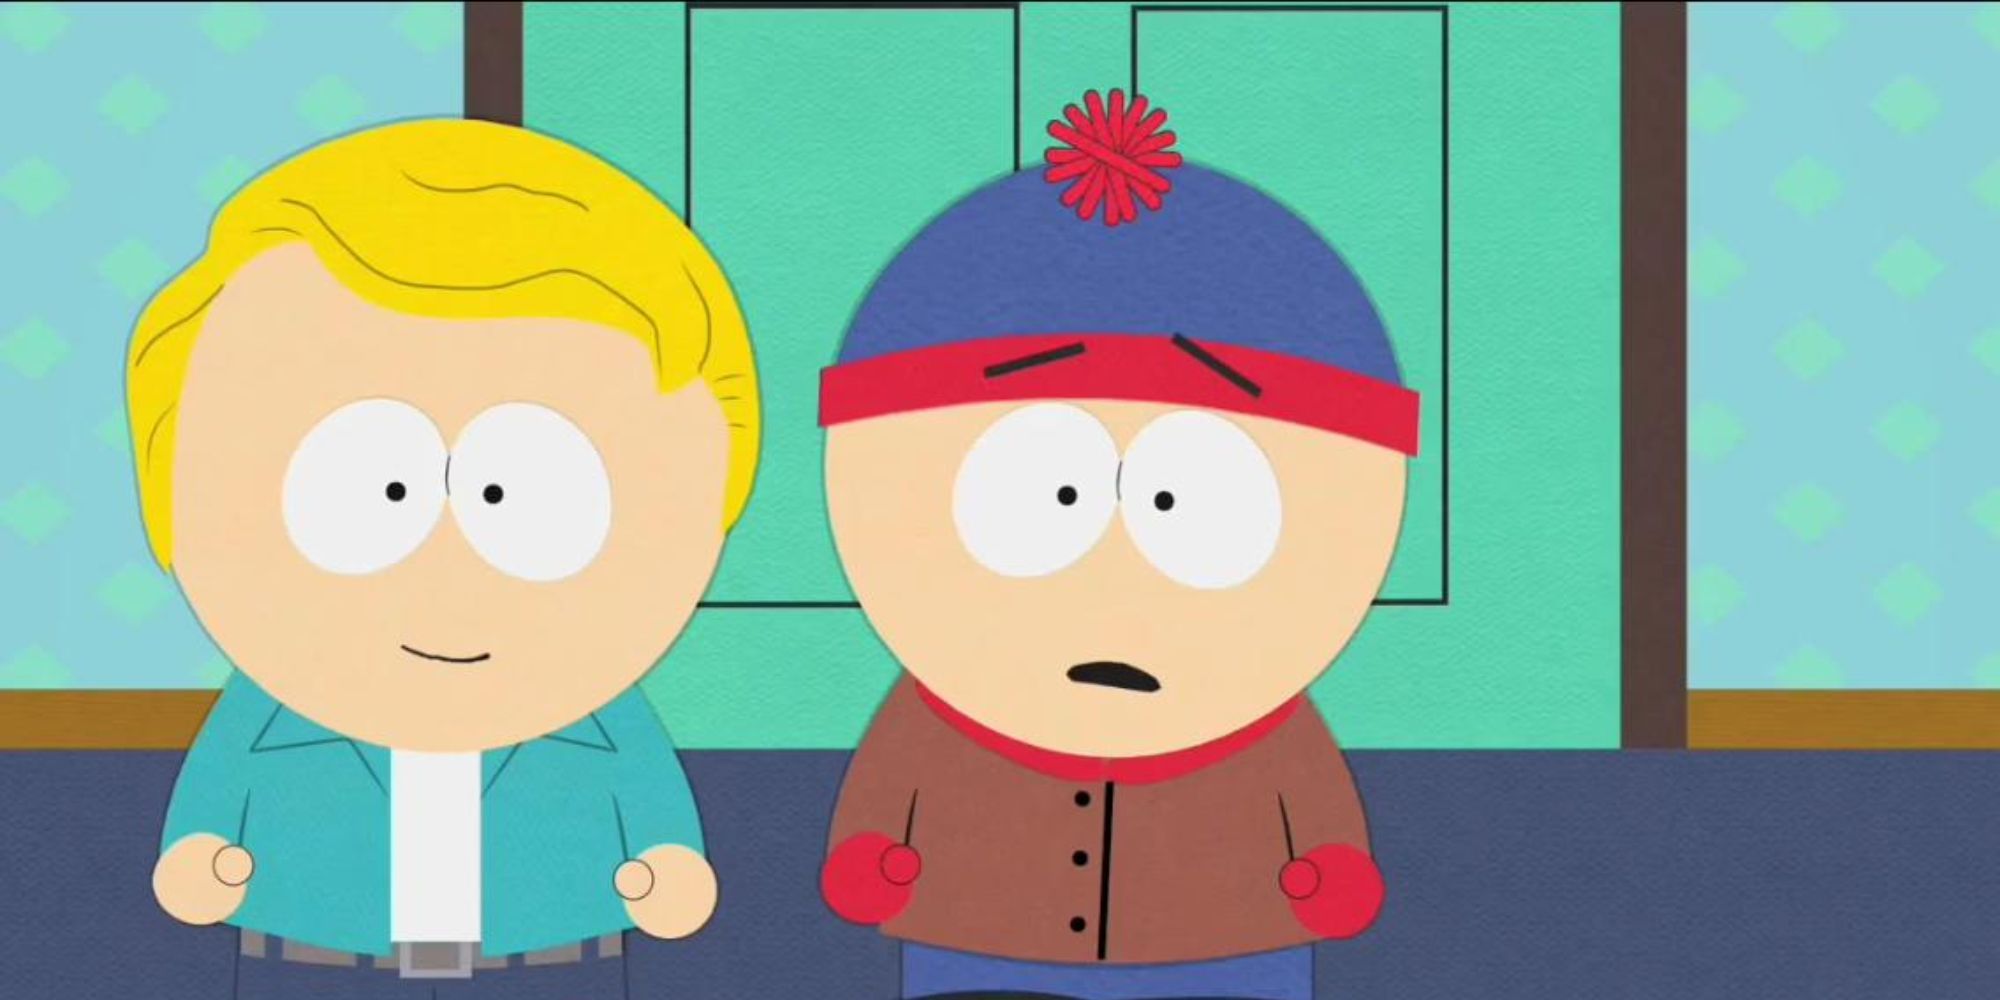 Gary and Stan walk into a room in 'South Park'